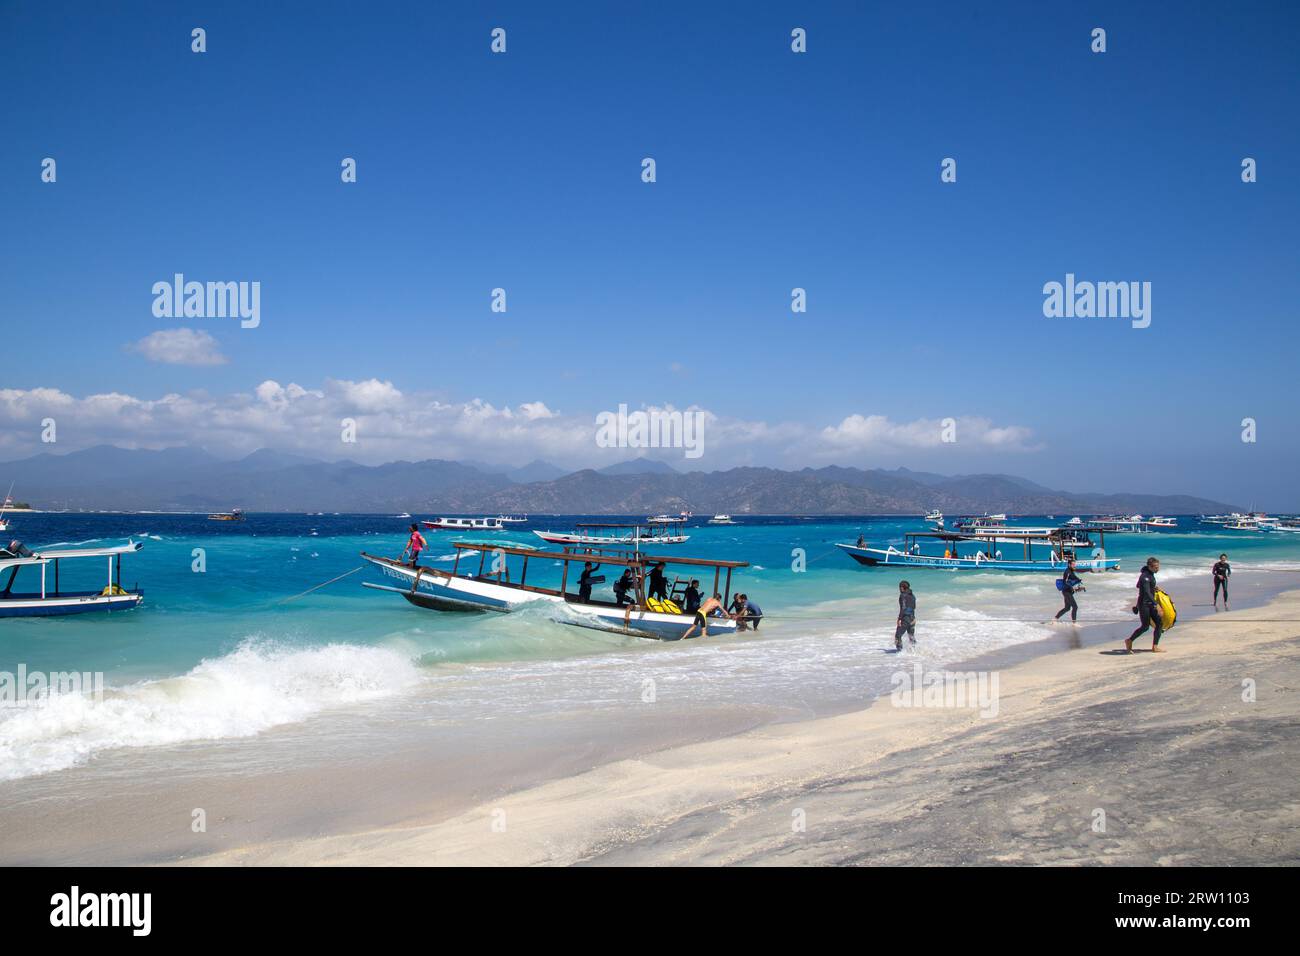 Gili Islands, Indonesia, July 09, 2015: Group of tourists arriving on Gili Trawangan after scuba diving trip Stock Photo